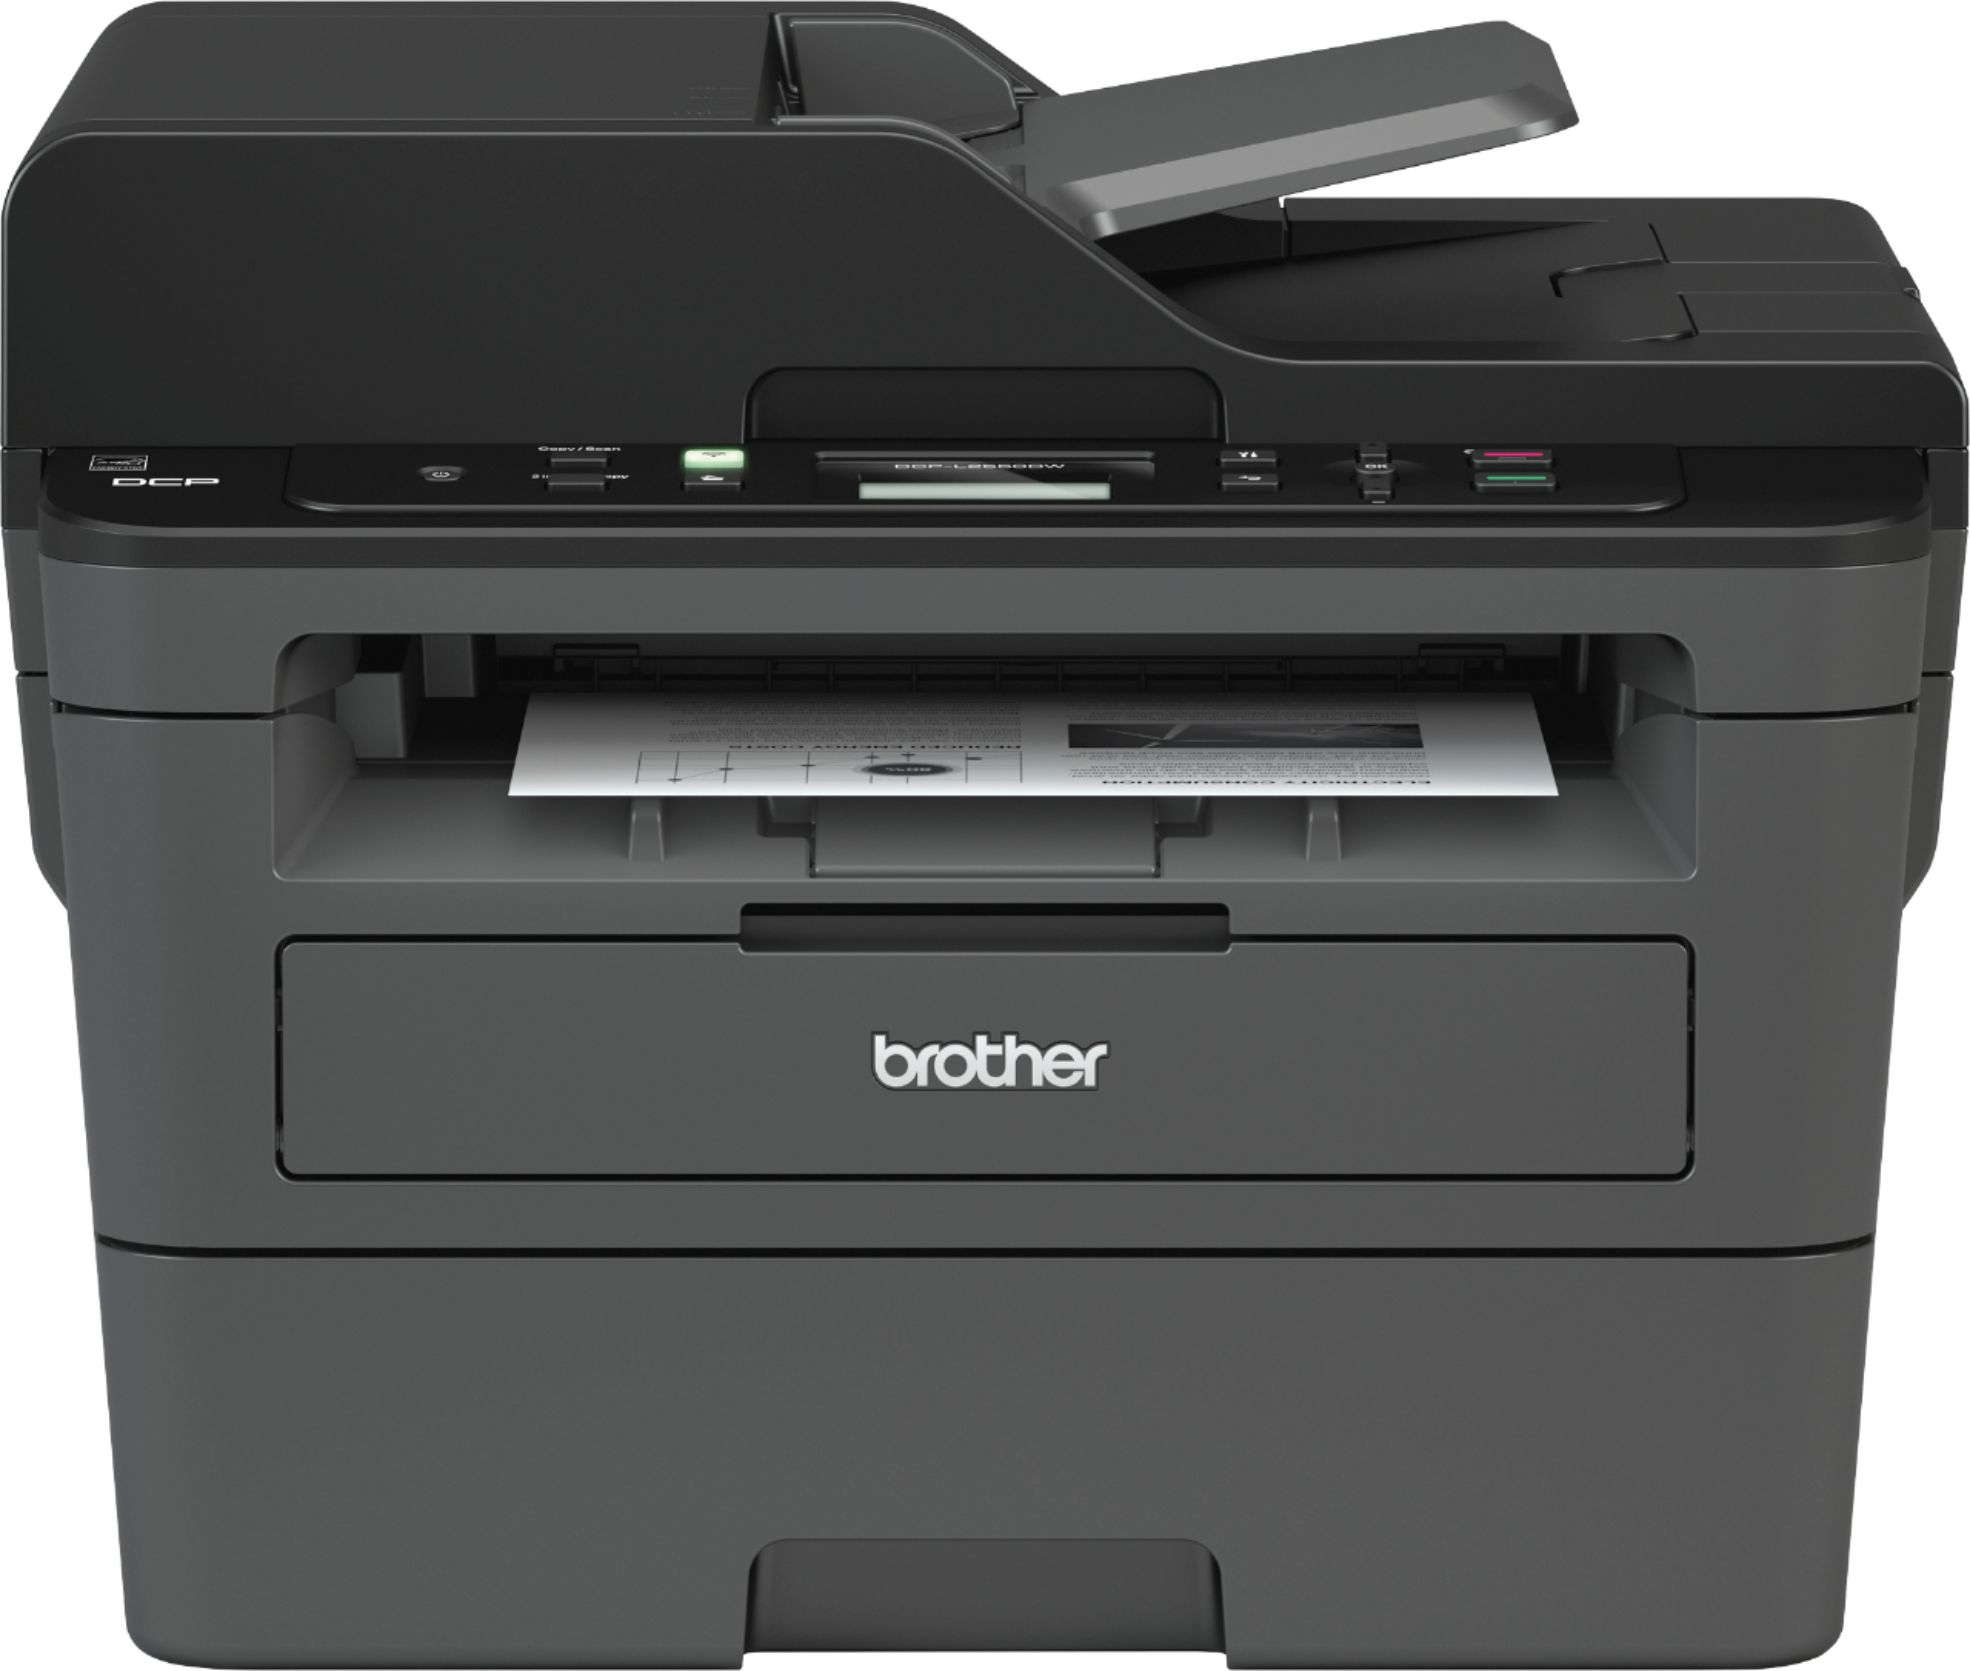 Brother Wireless Refresh Subscription Eligible Laser Printer Black DCP-L2550DW Best Buy